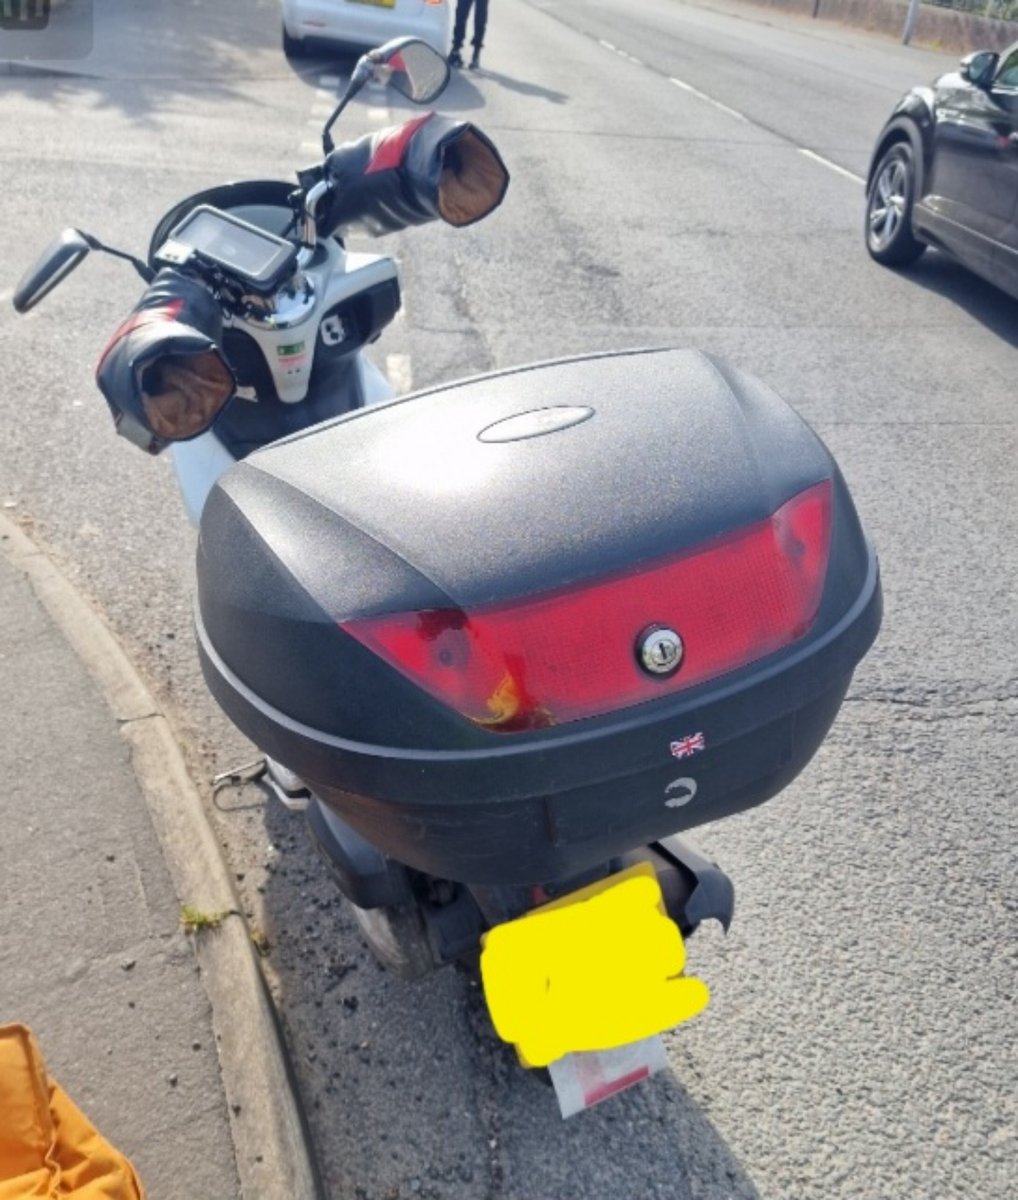 Speed checksite in Leyland today with 11 vehicles reported for excess speed including this blue motorbike which was almost double the speed limit whilst overtaking other vehicles.   The scooter rider was reported for insurance offences.  #yousaidwedid #T2RPU #Fatal5